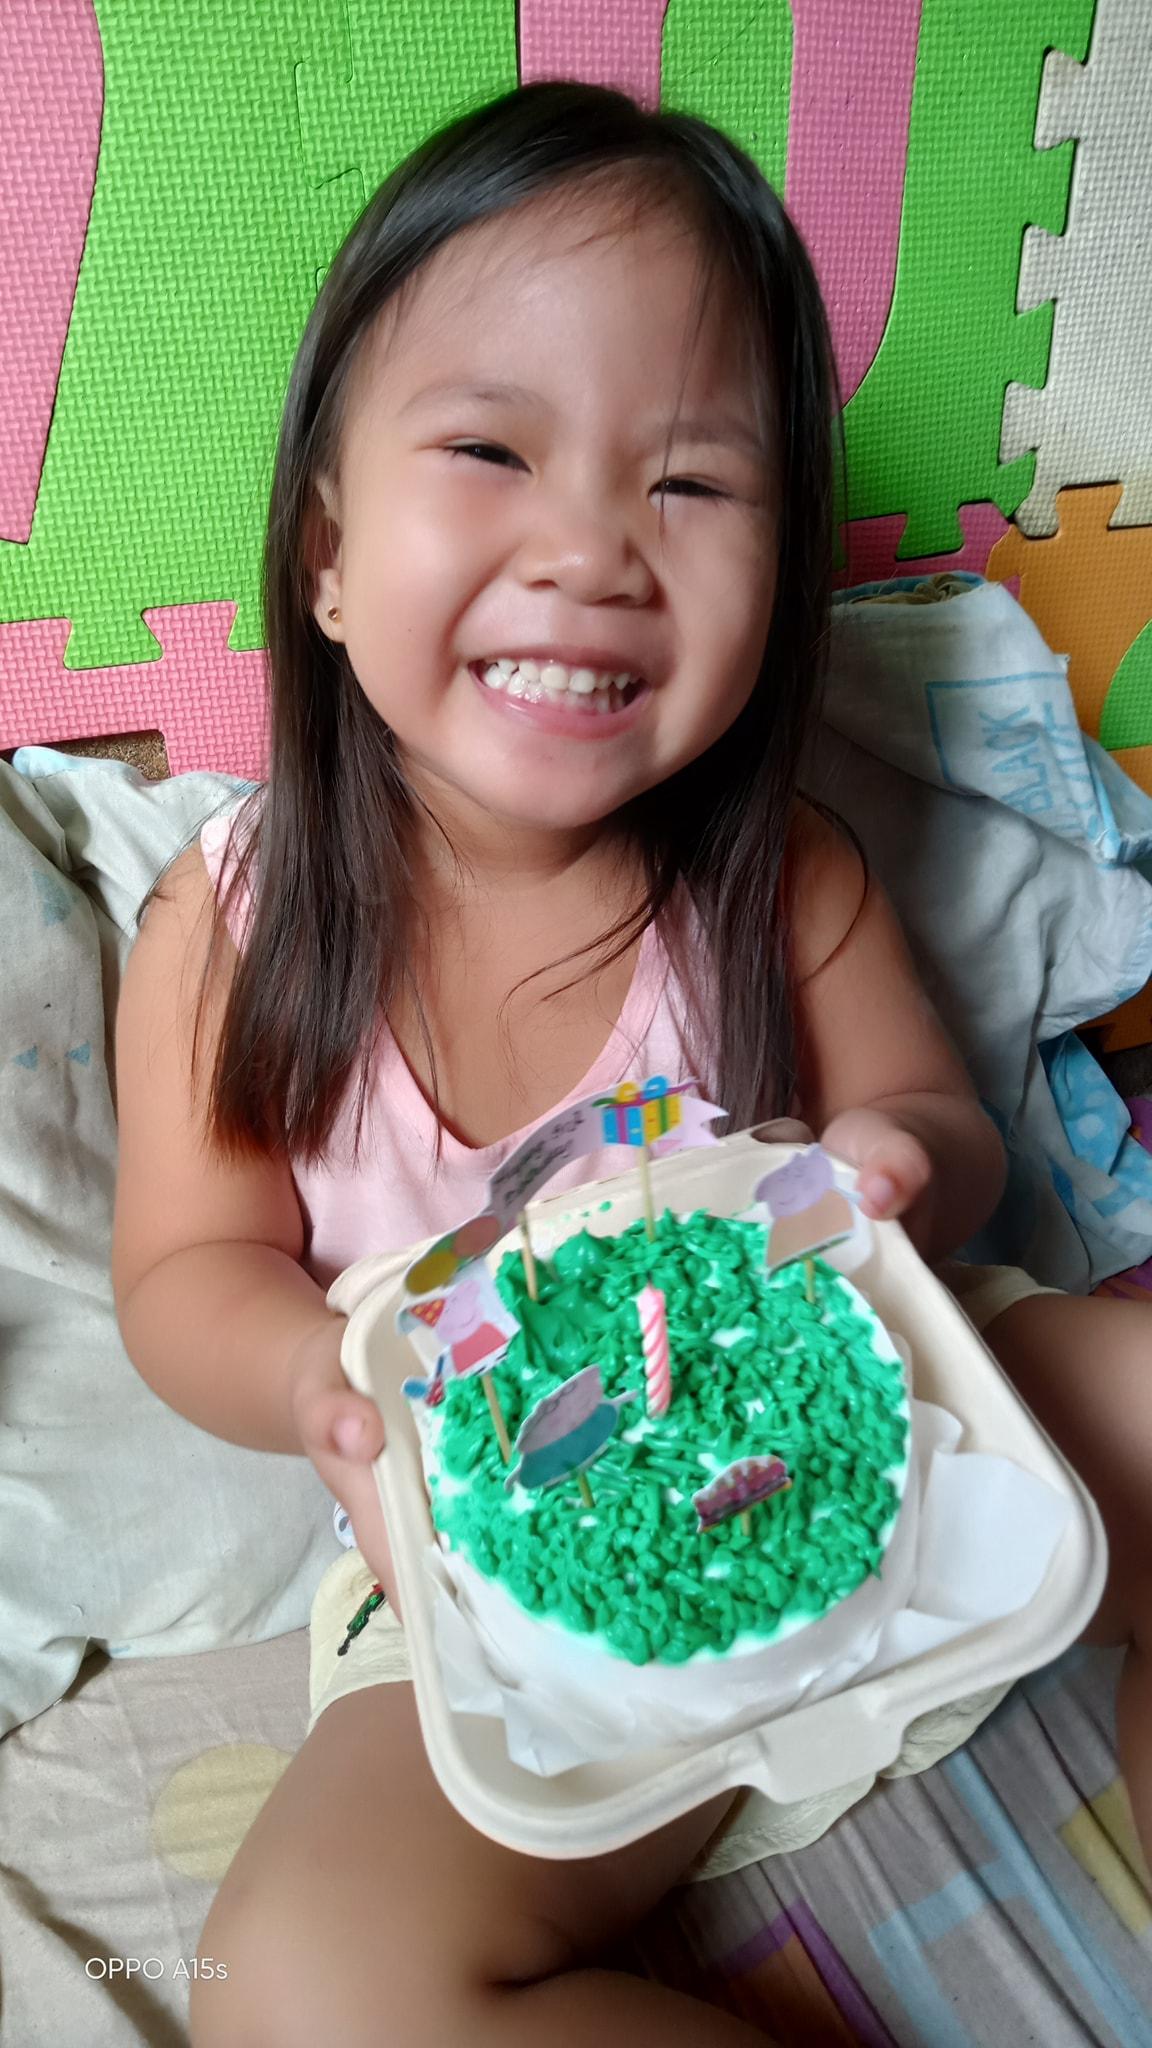 Rochelle's daughter with her Peppa Pig cake. (Courtesy of <a href="https://www.facebook.com/rochelle.tanael.9">Rochelle Reyes</a>)